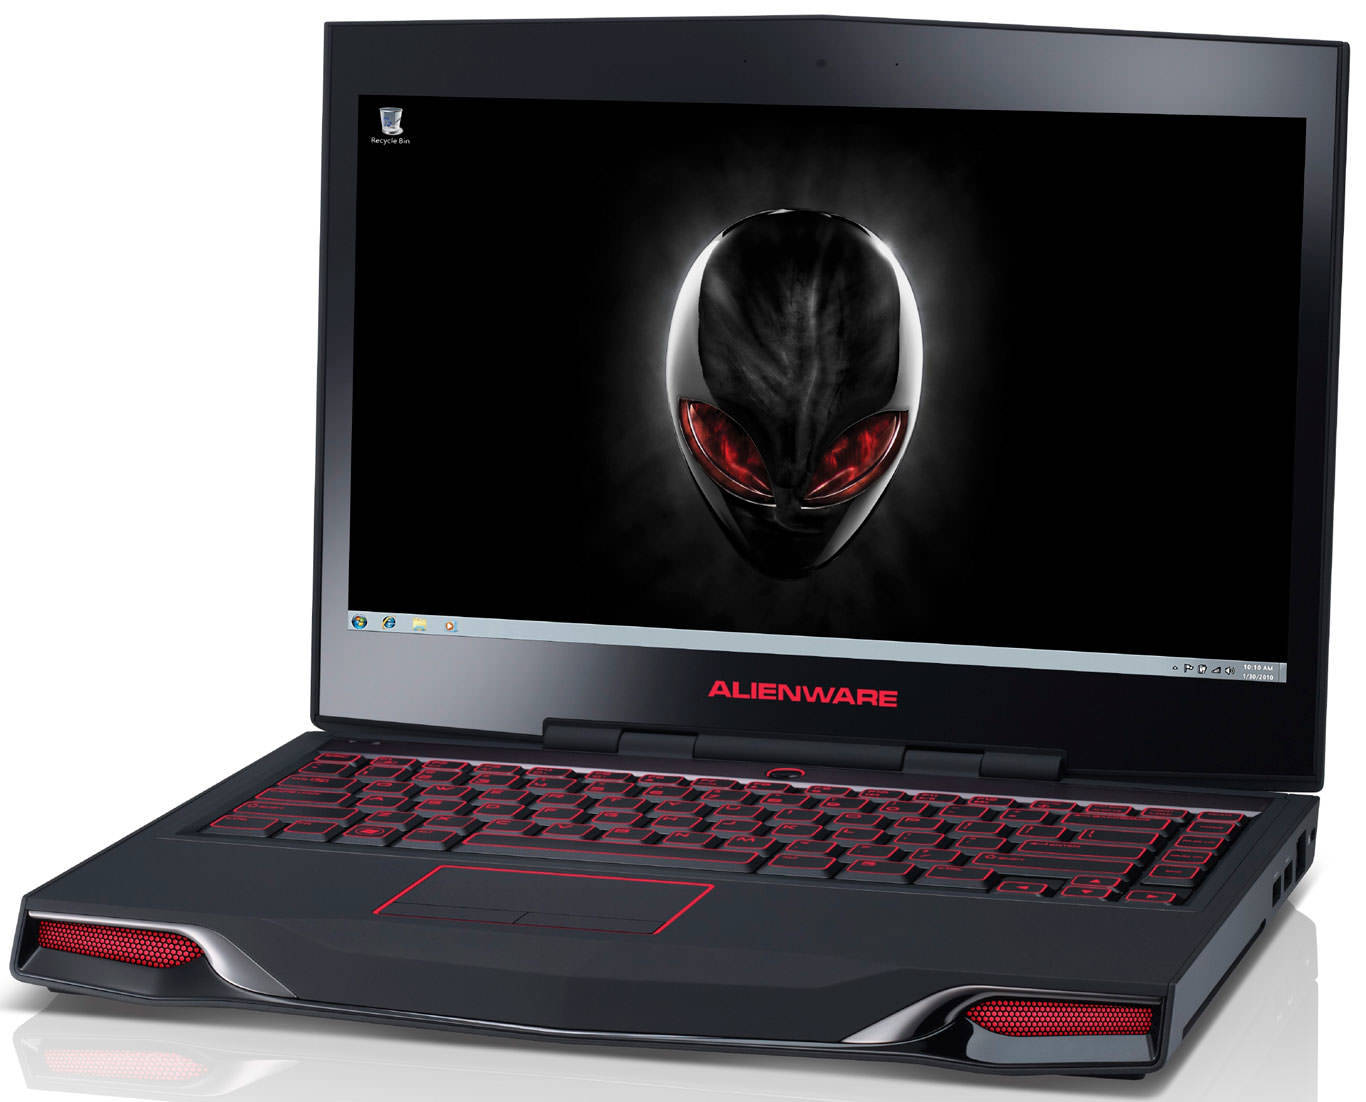 Dell Alienware Laptop M14x Price In India Full Specifications 31st Jan 21 At Gadgets Now